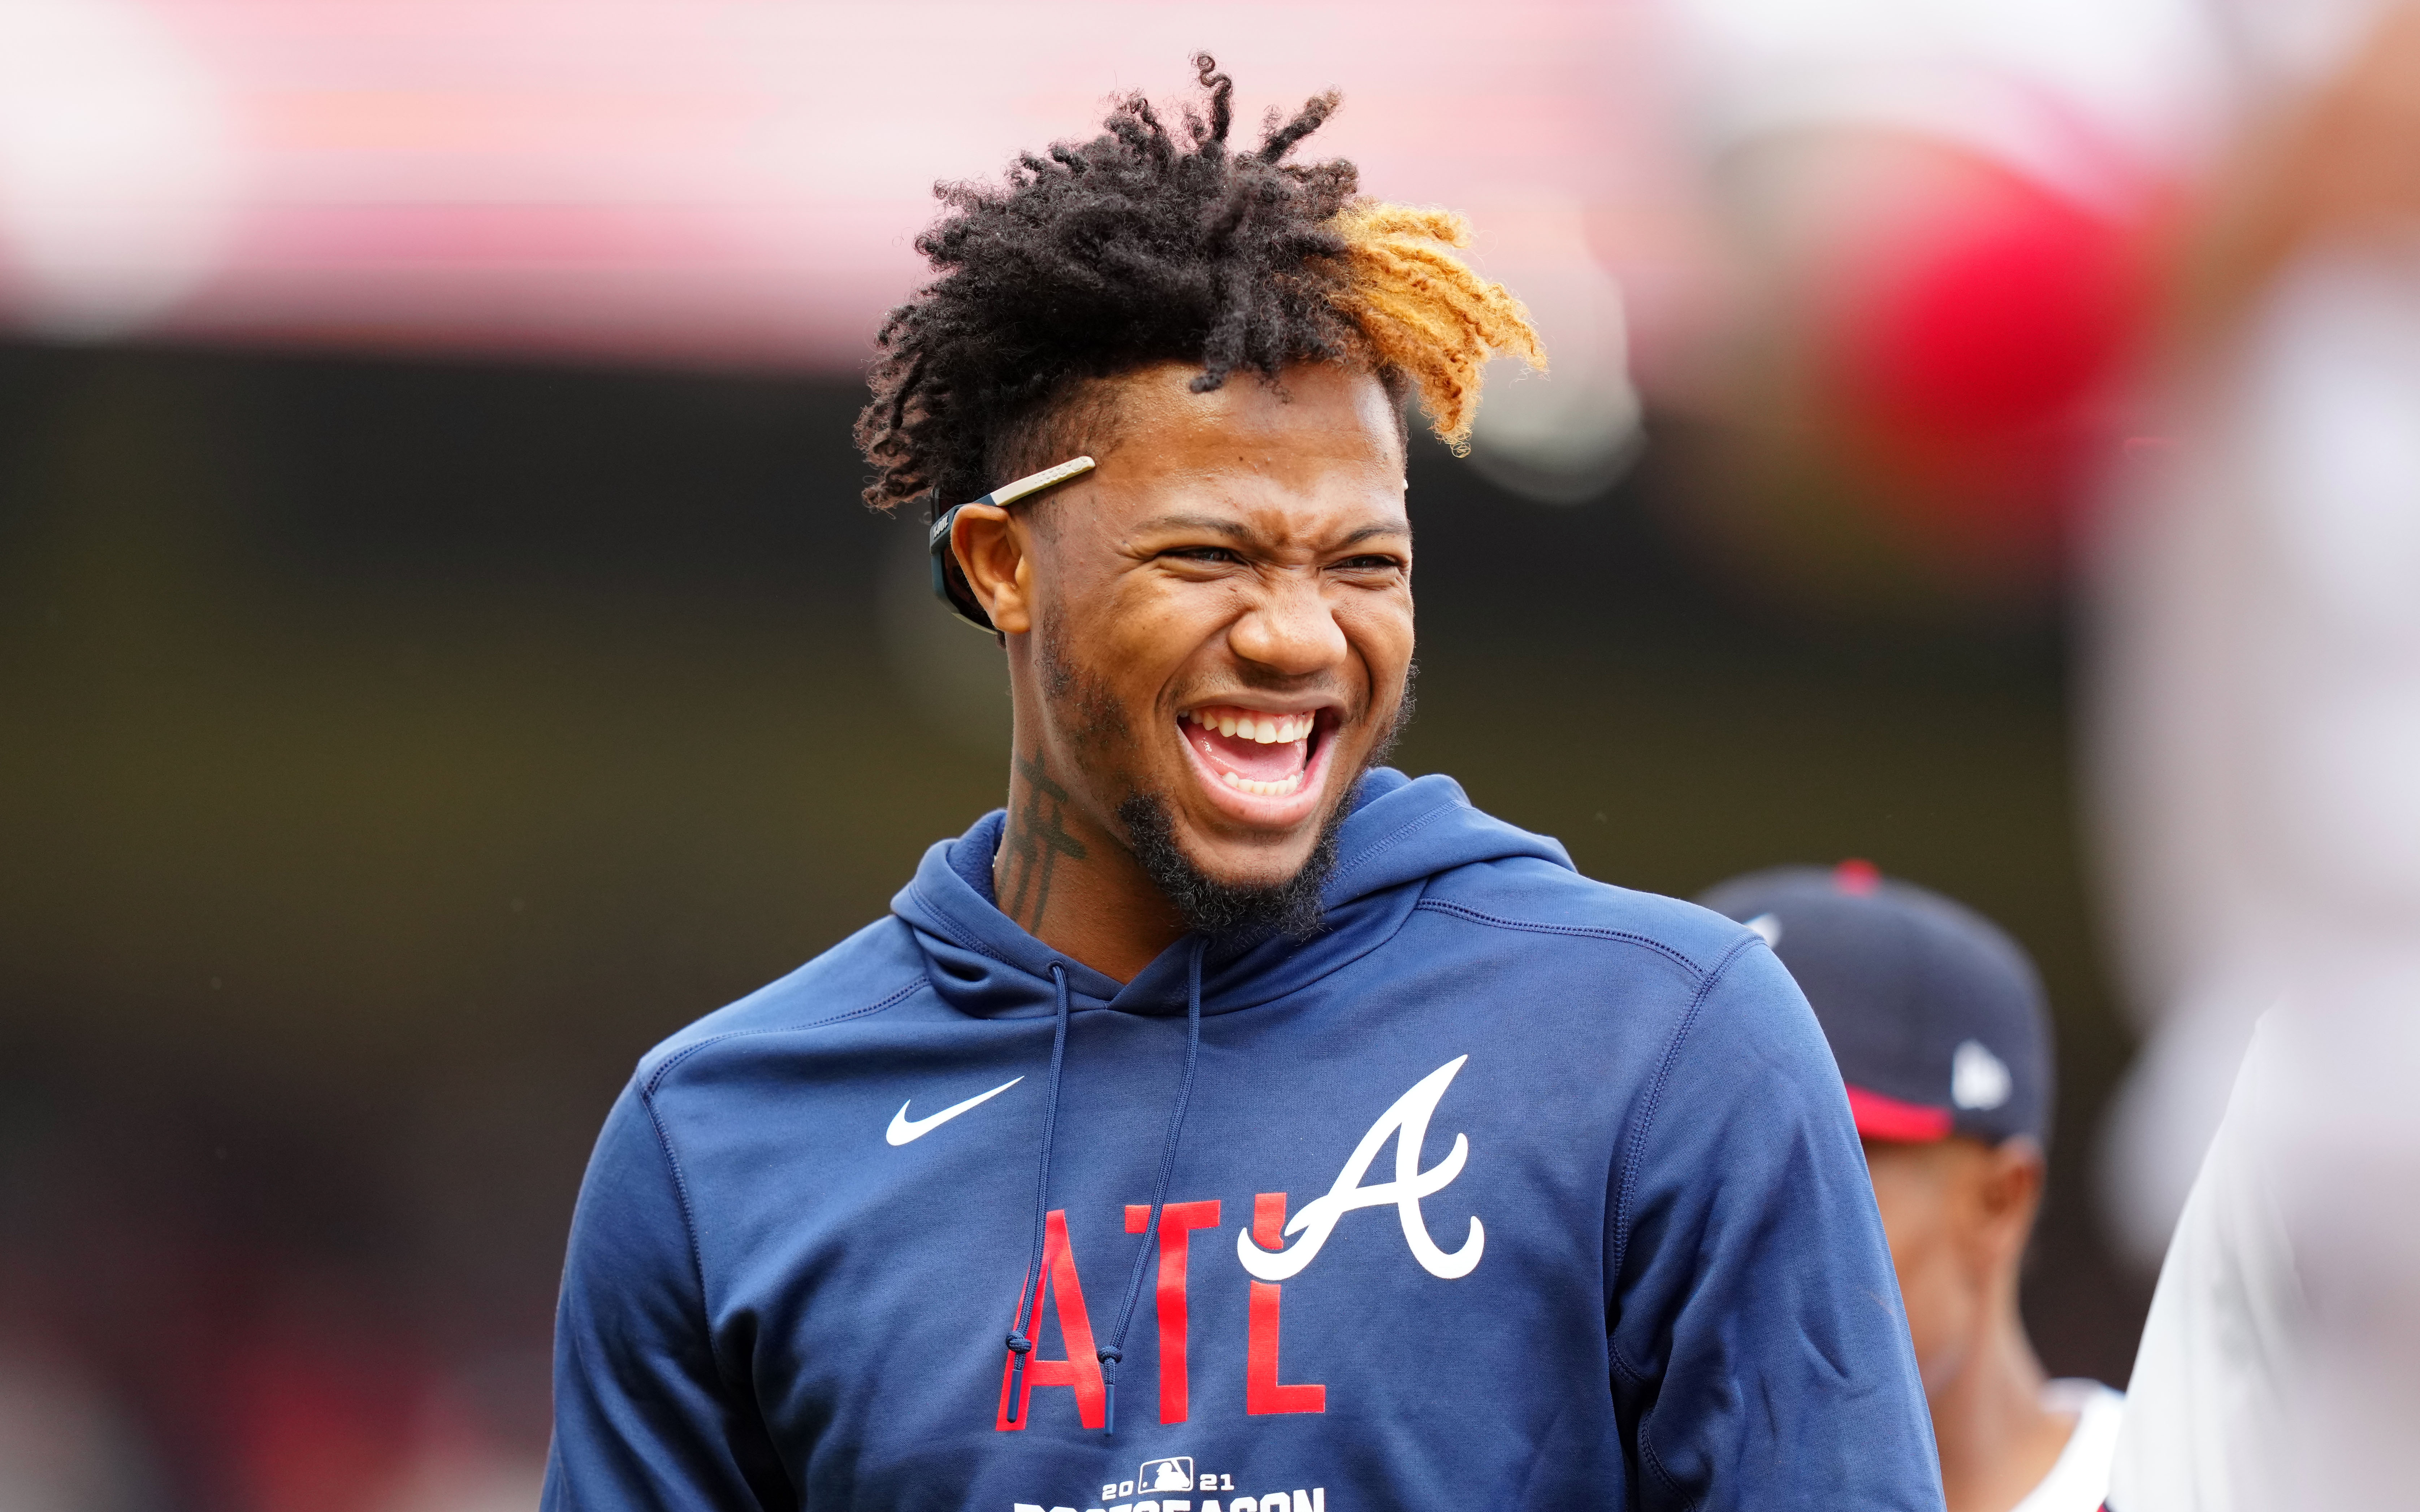 Celebrate Your Atlanta Braves with an Official Ronald Acuna Jr. Jersey